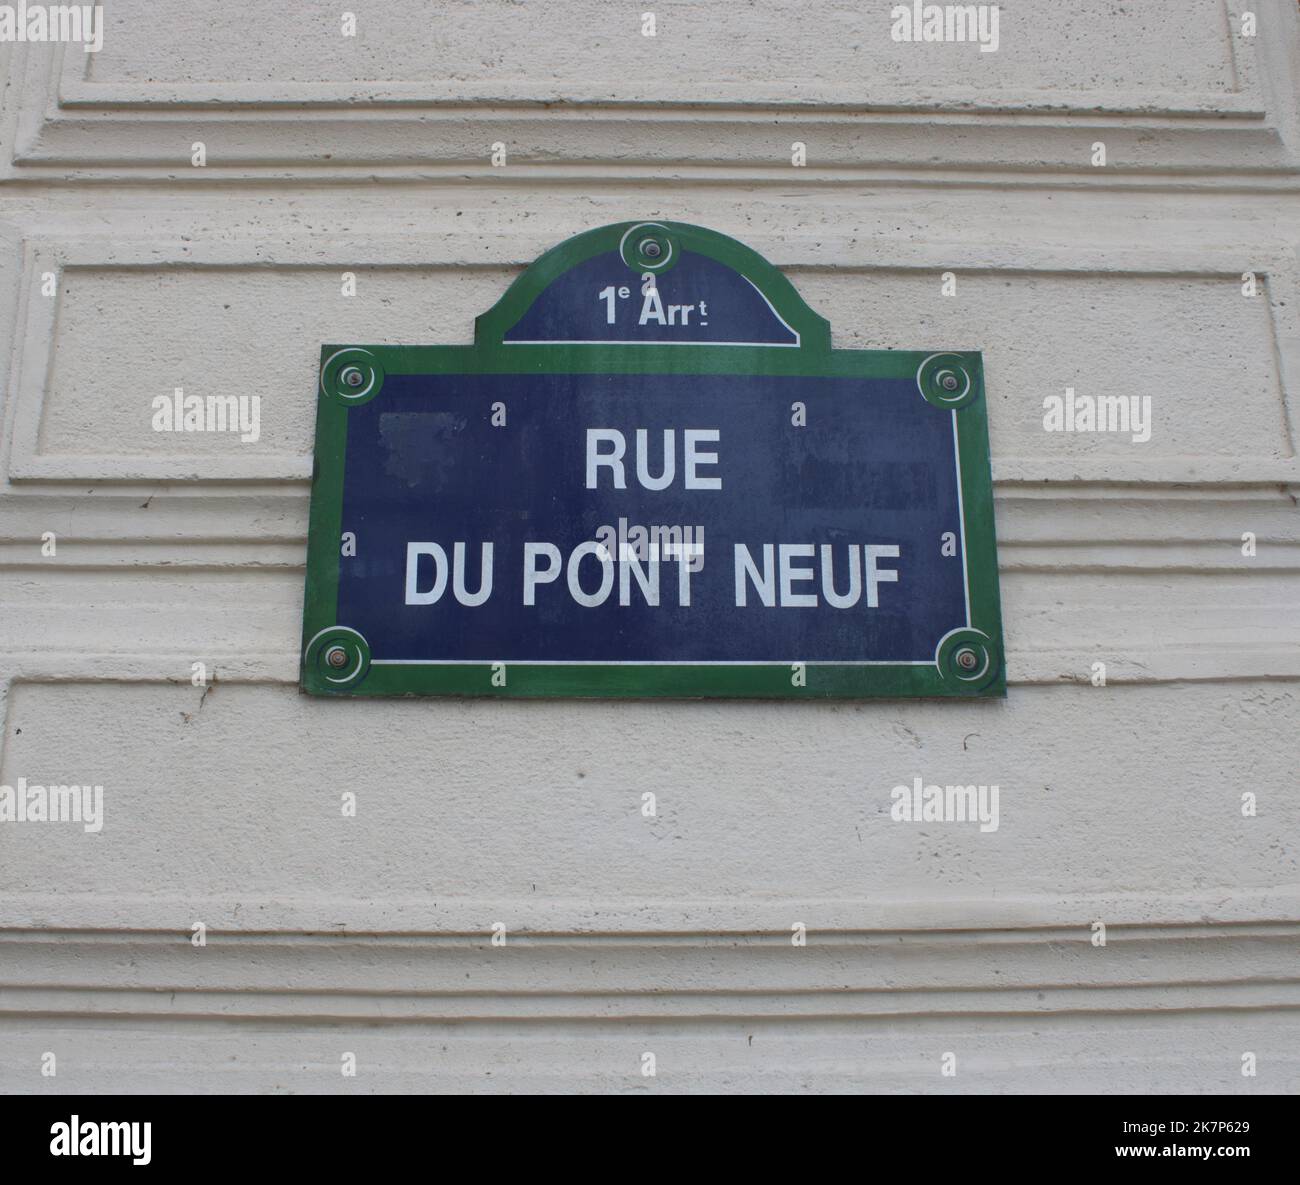 Typical Paris street-sign here depicting the Rue du Pont Neuf located in the 1st arrondissement in Paris France. Stock Photo